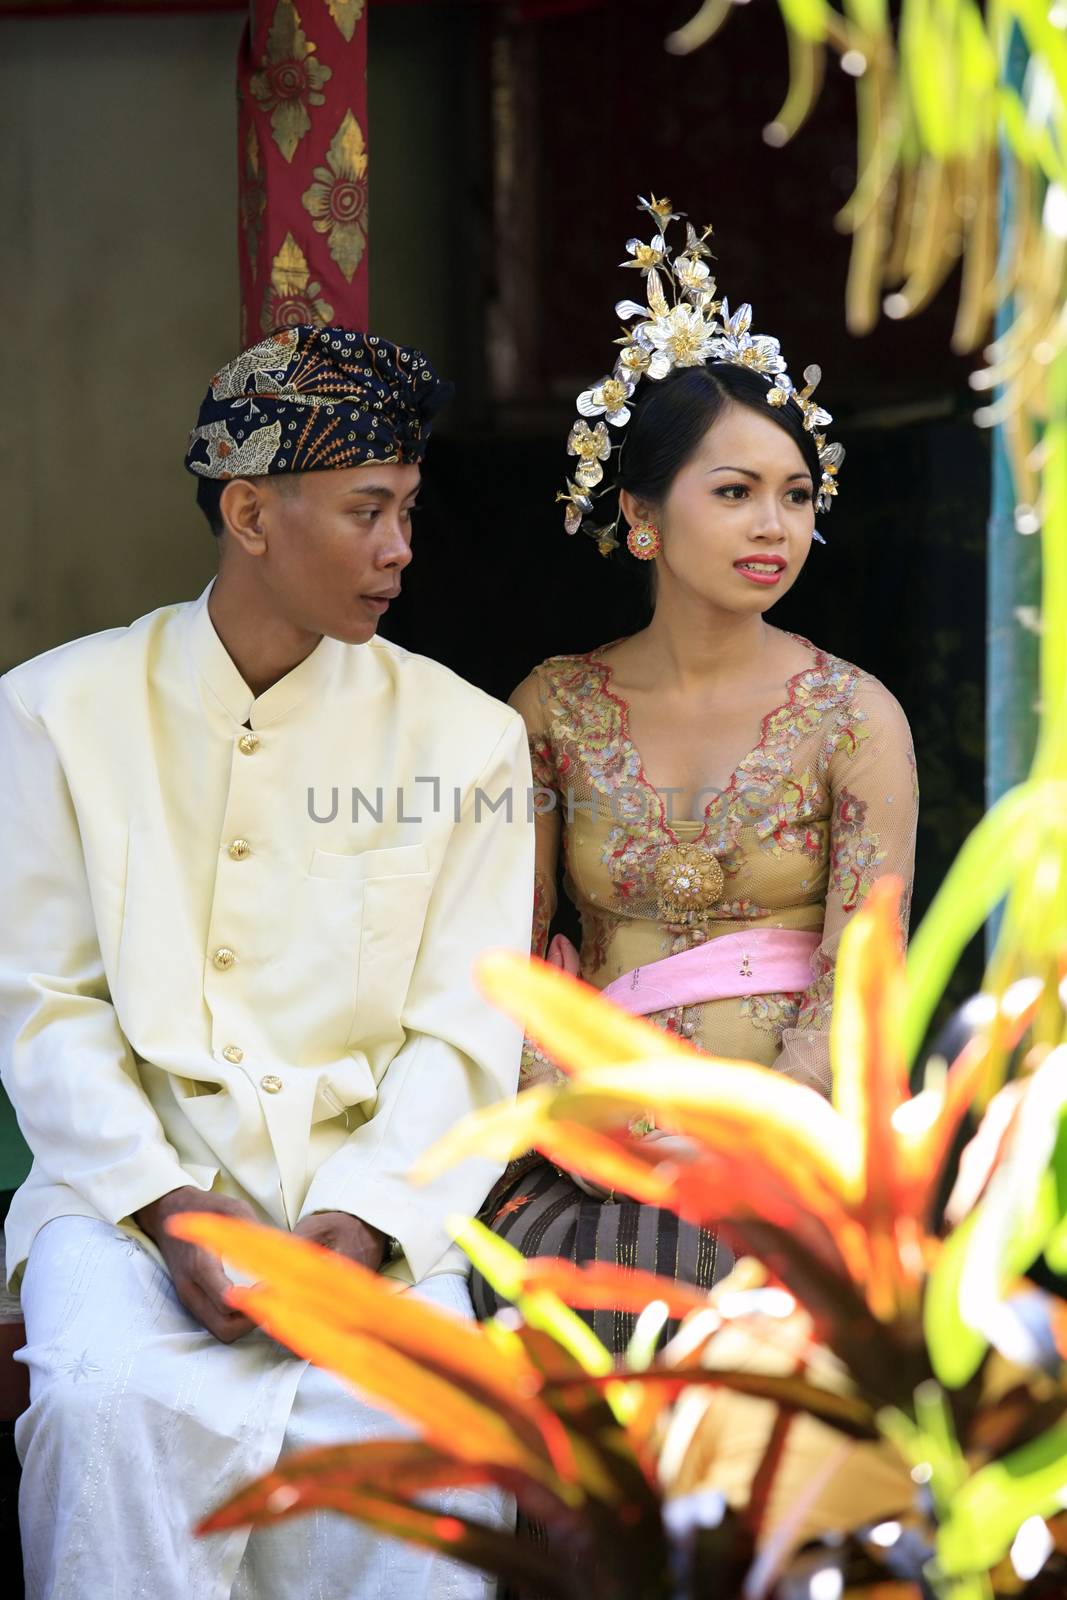 The moment of wedding ceremony of the Indonesian wedding